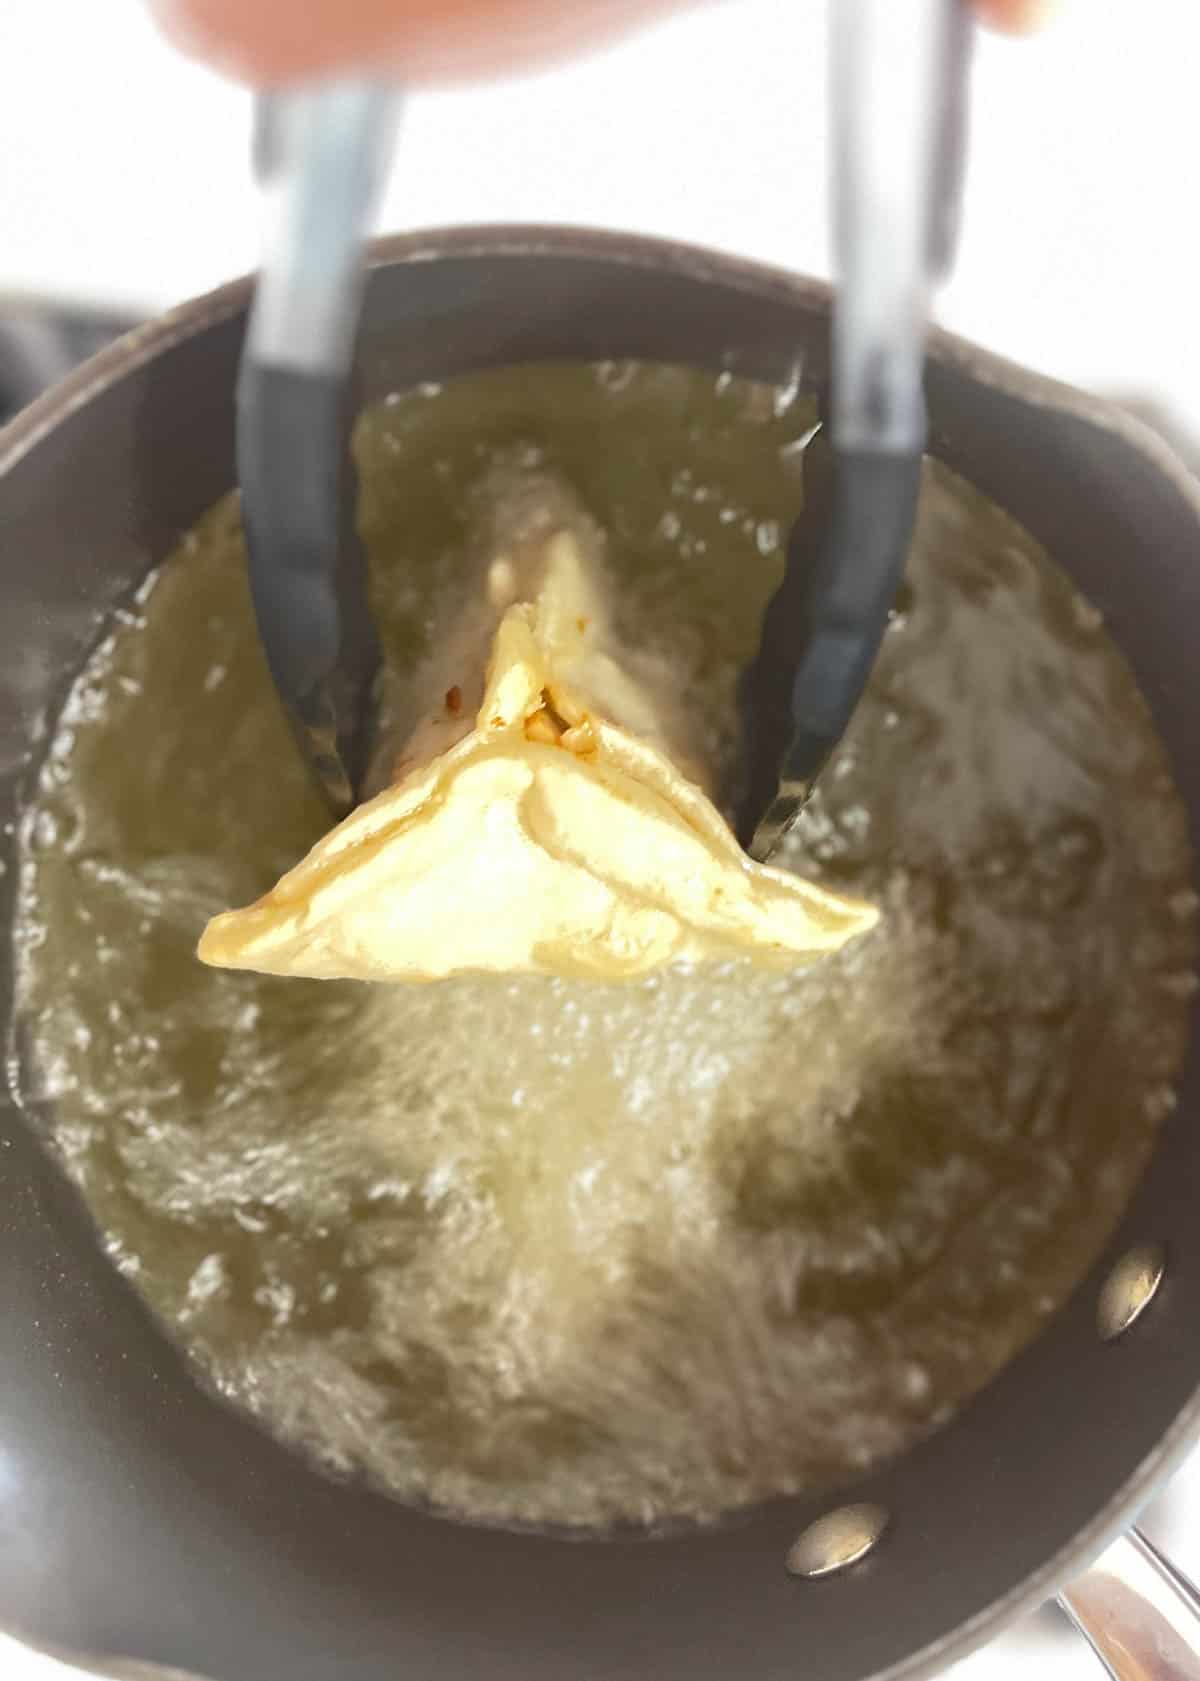 A person frying onion samosas in a pan.